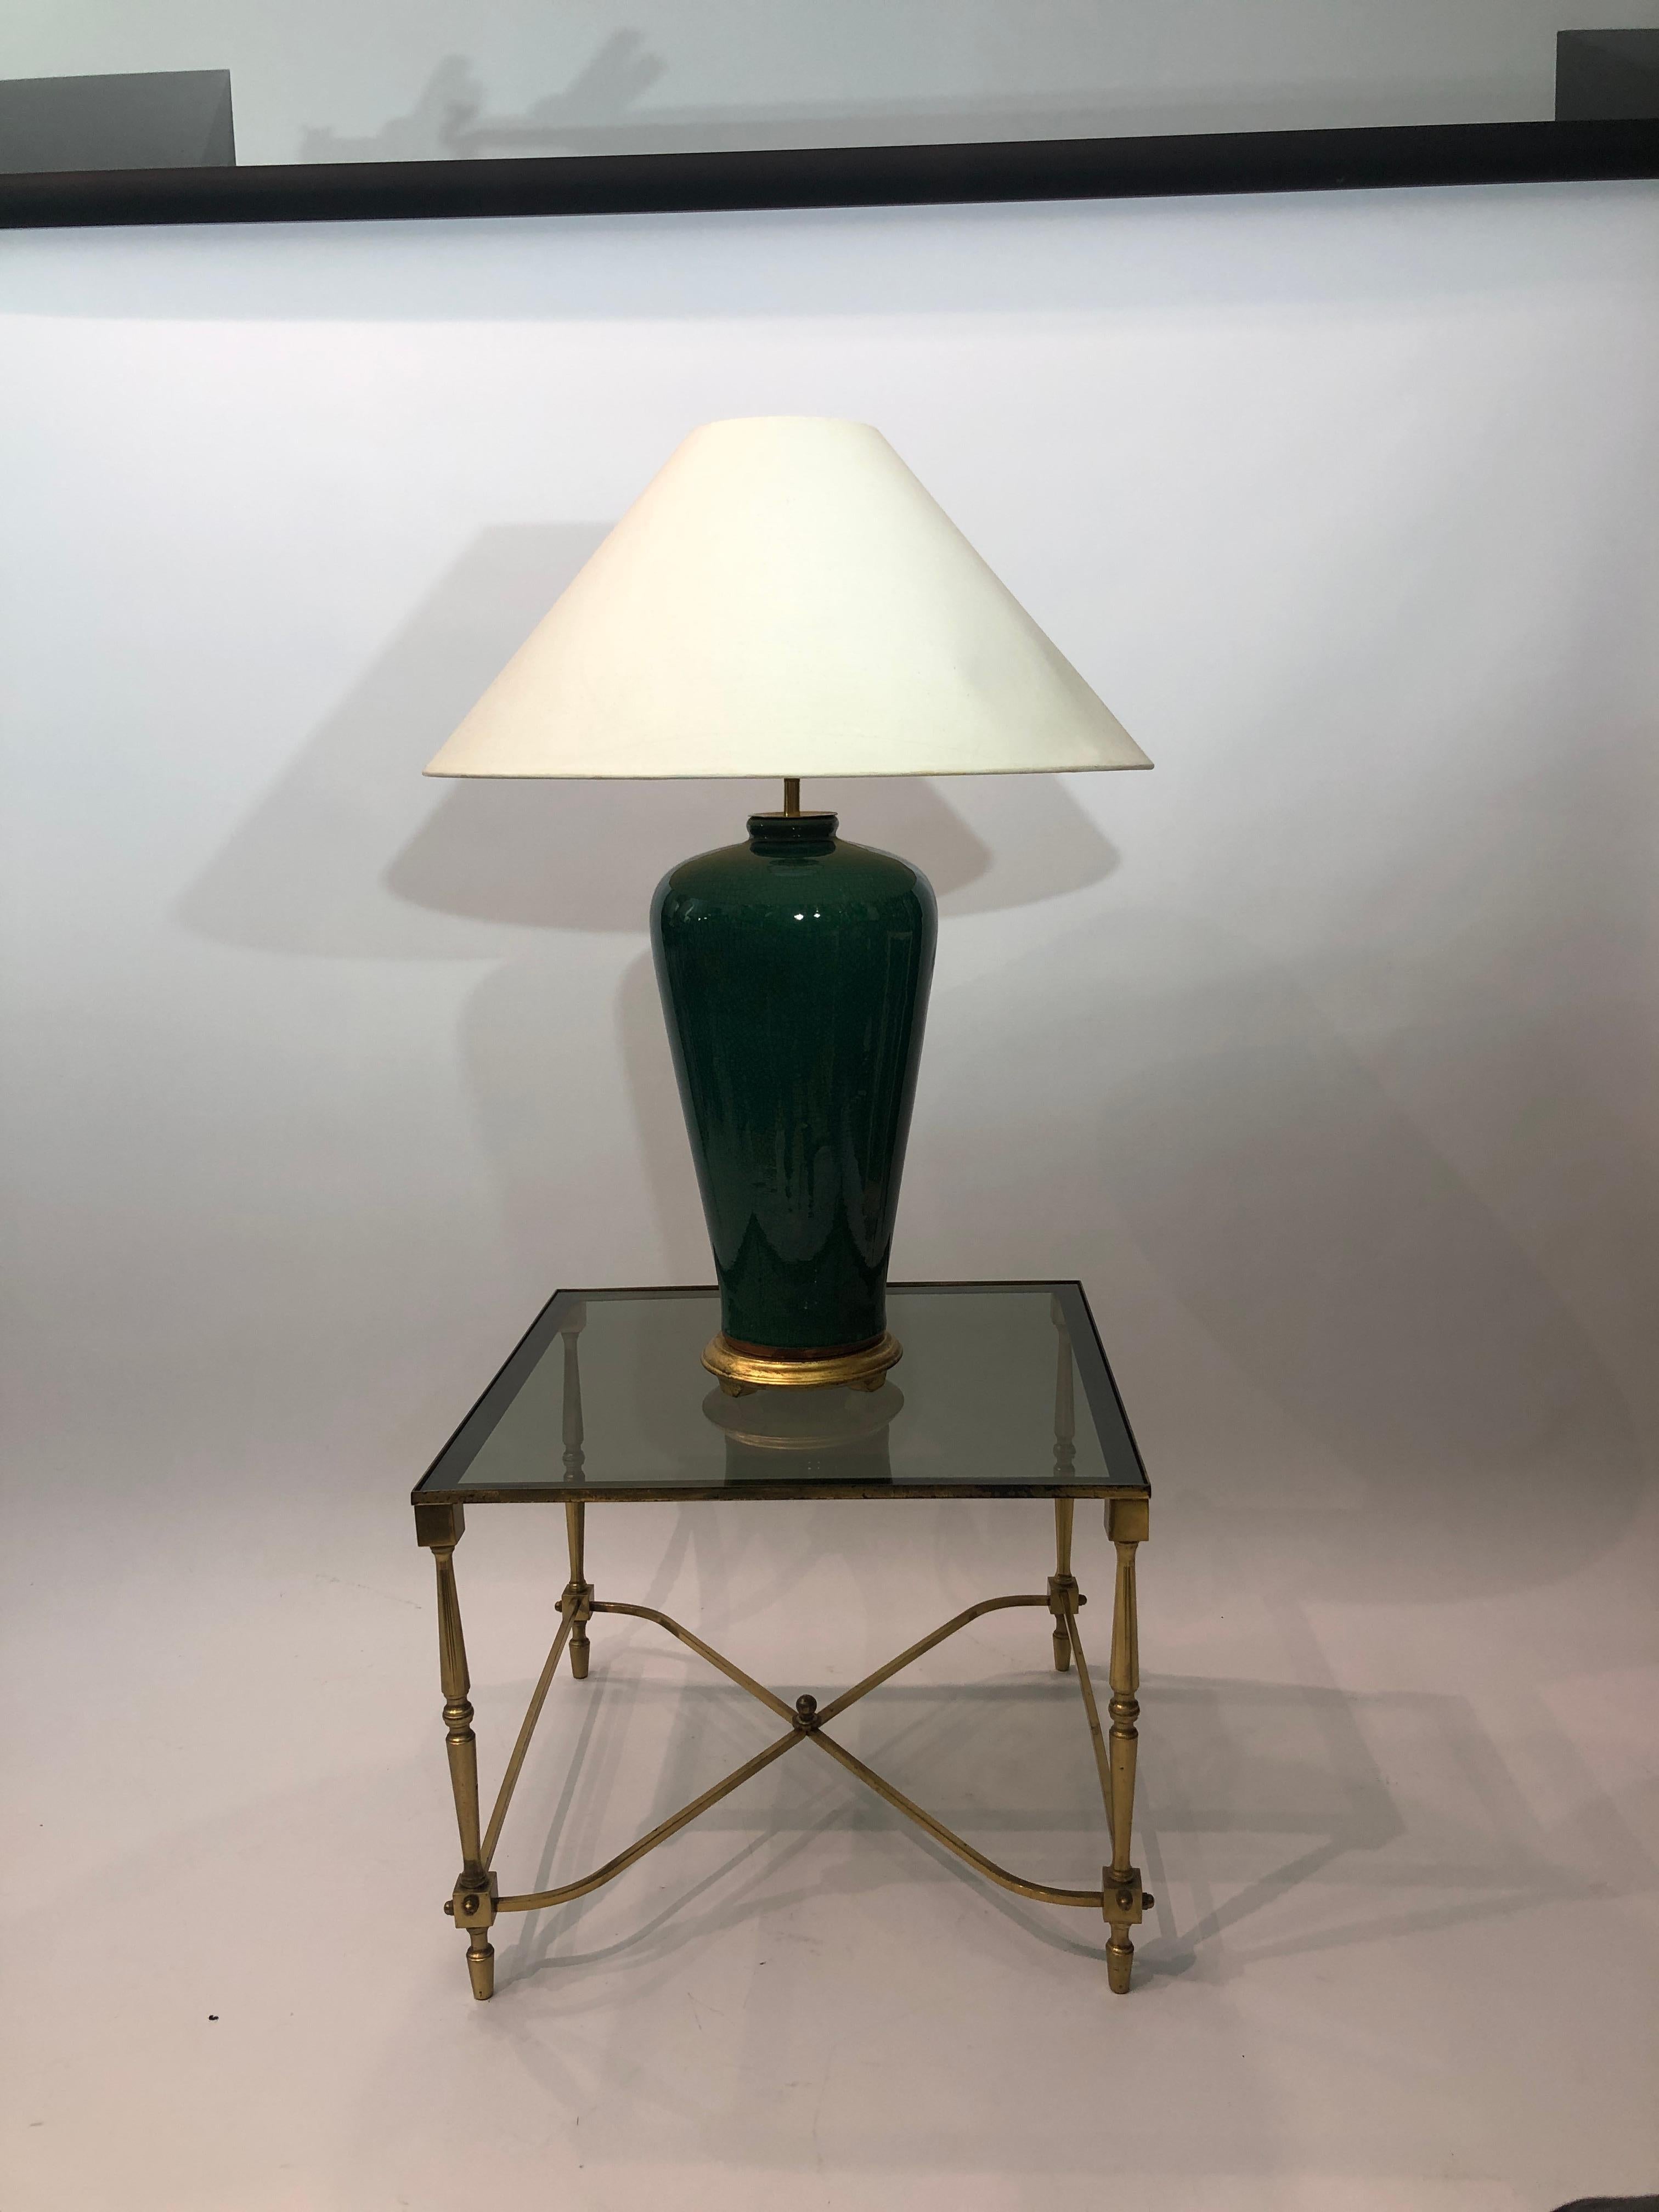 An elegant tall emerald green in cracked glaze ceramic with brass fittings siting atop on a round gold guilted base. 

The lamp would look amazing in most interiors and complement any room.

Shade for display purpose only. This listing is only for